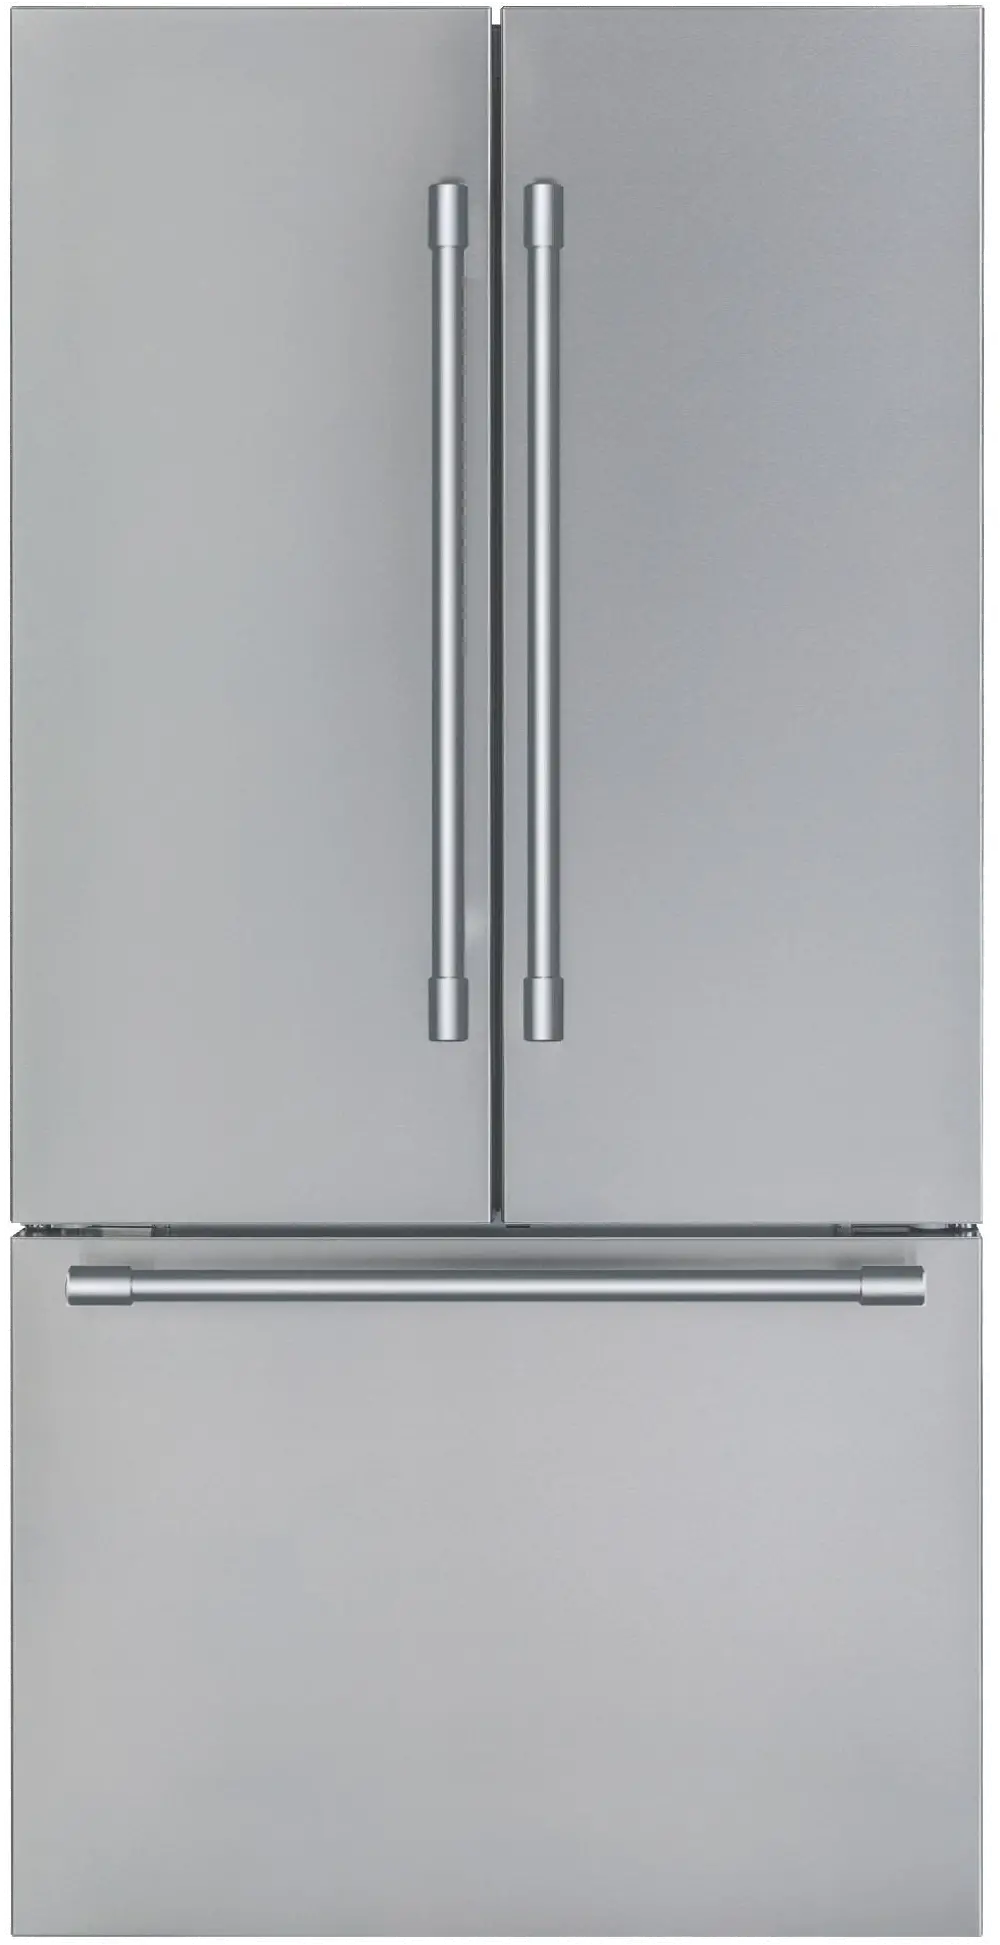 T36FT820NS Thermador Professional Freestanding Refrigerator - French Door, Stainless Steel, 36 Inch,19.4 cu. ft.-1